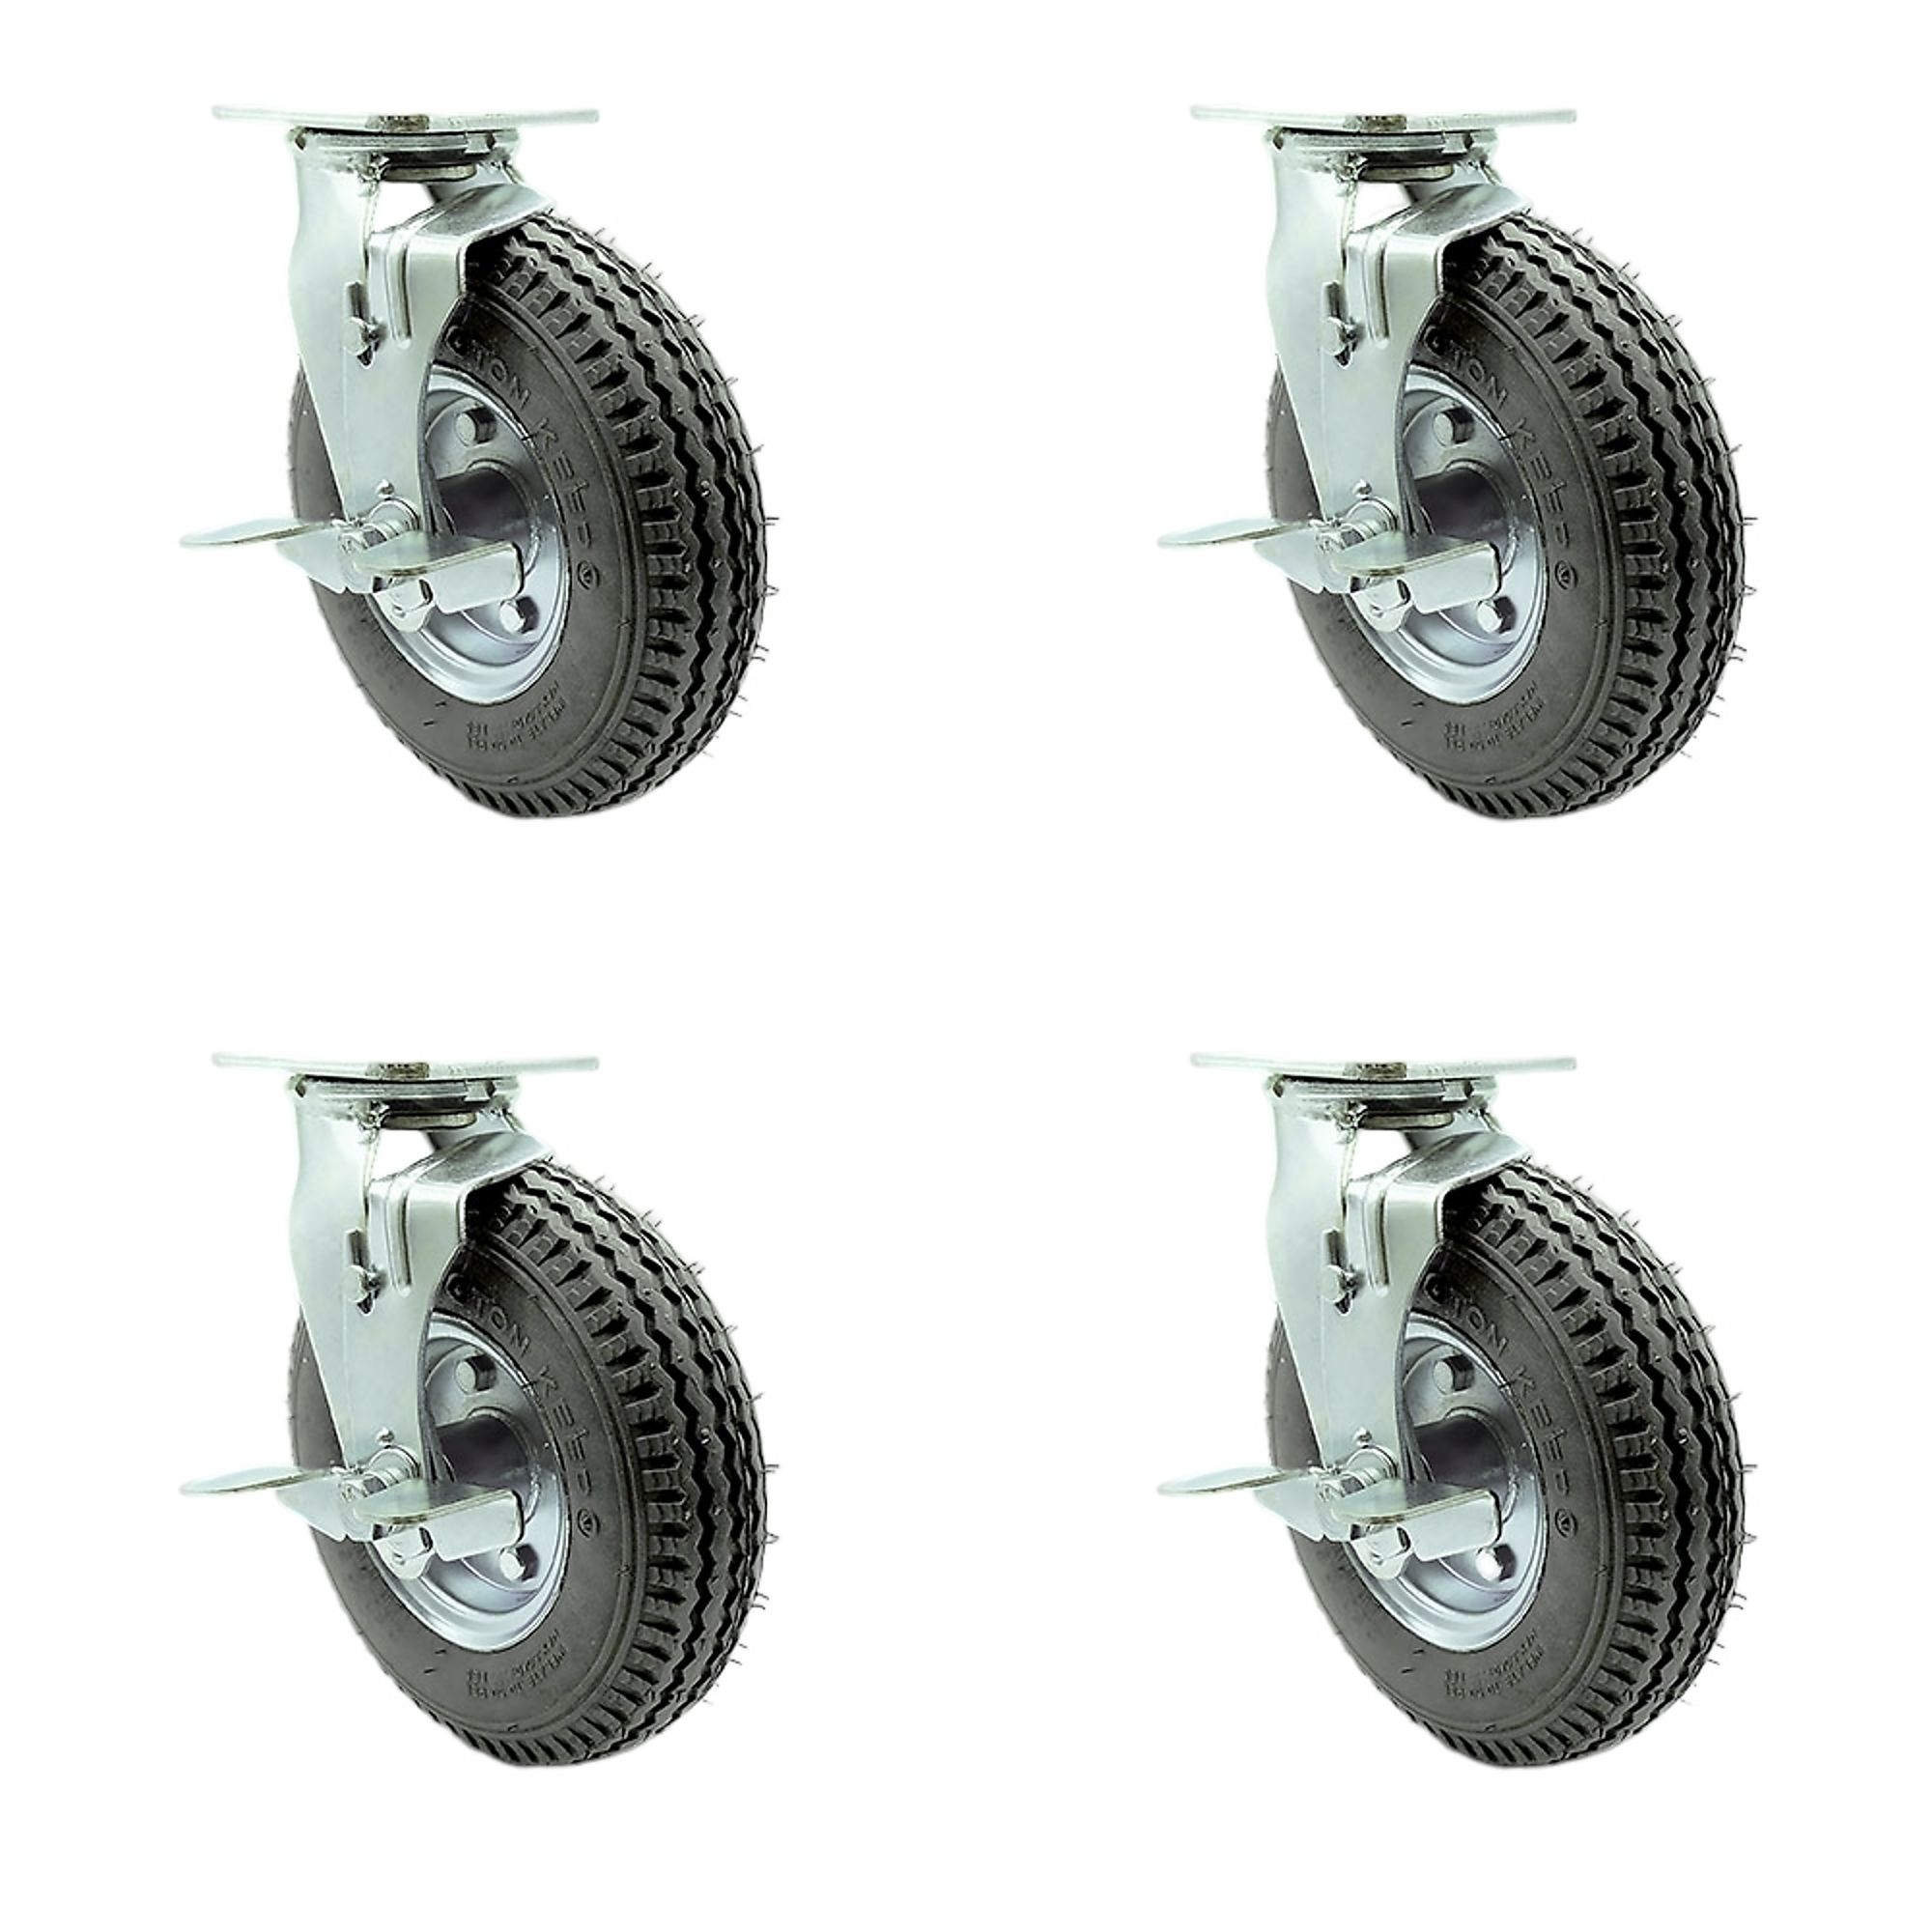 8Inch x 2 1/2Inch Plate Casters, Wheel Diameter 8 in, Caster Type Swivel, Package (qty.) 4, Model - Service Caster SCC-100S280-PNB-GRY-TLB-BSL-2-TLB-2